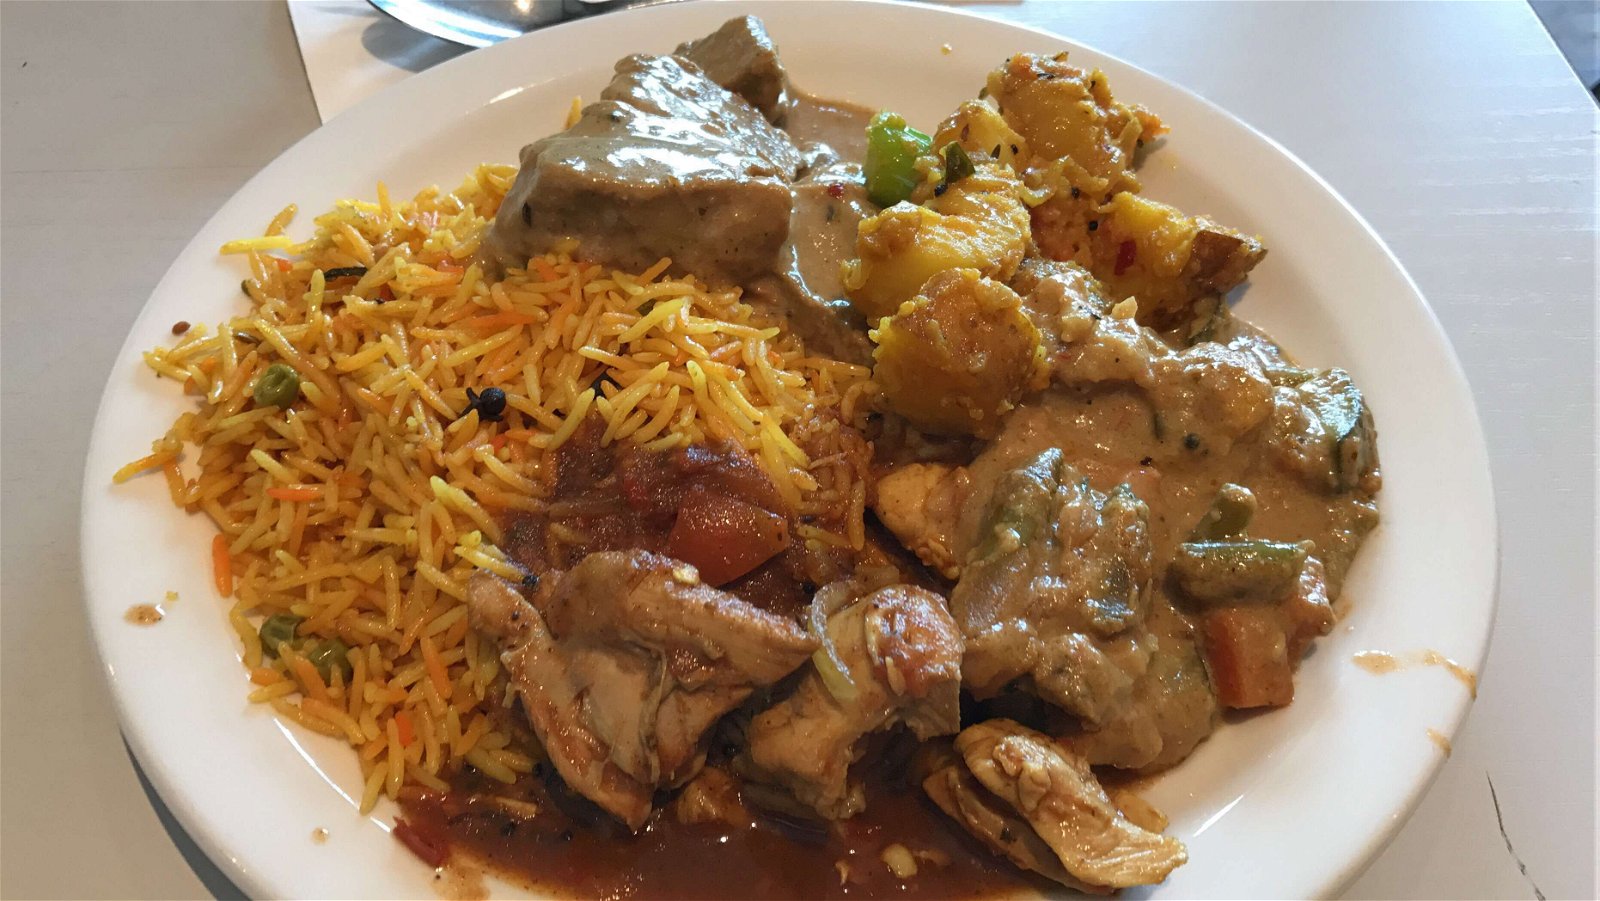 Golden Spice Indian Cuisine - Accommodation Find 0